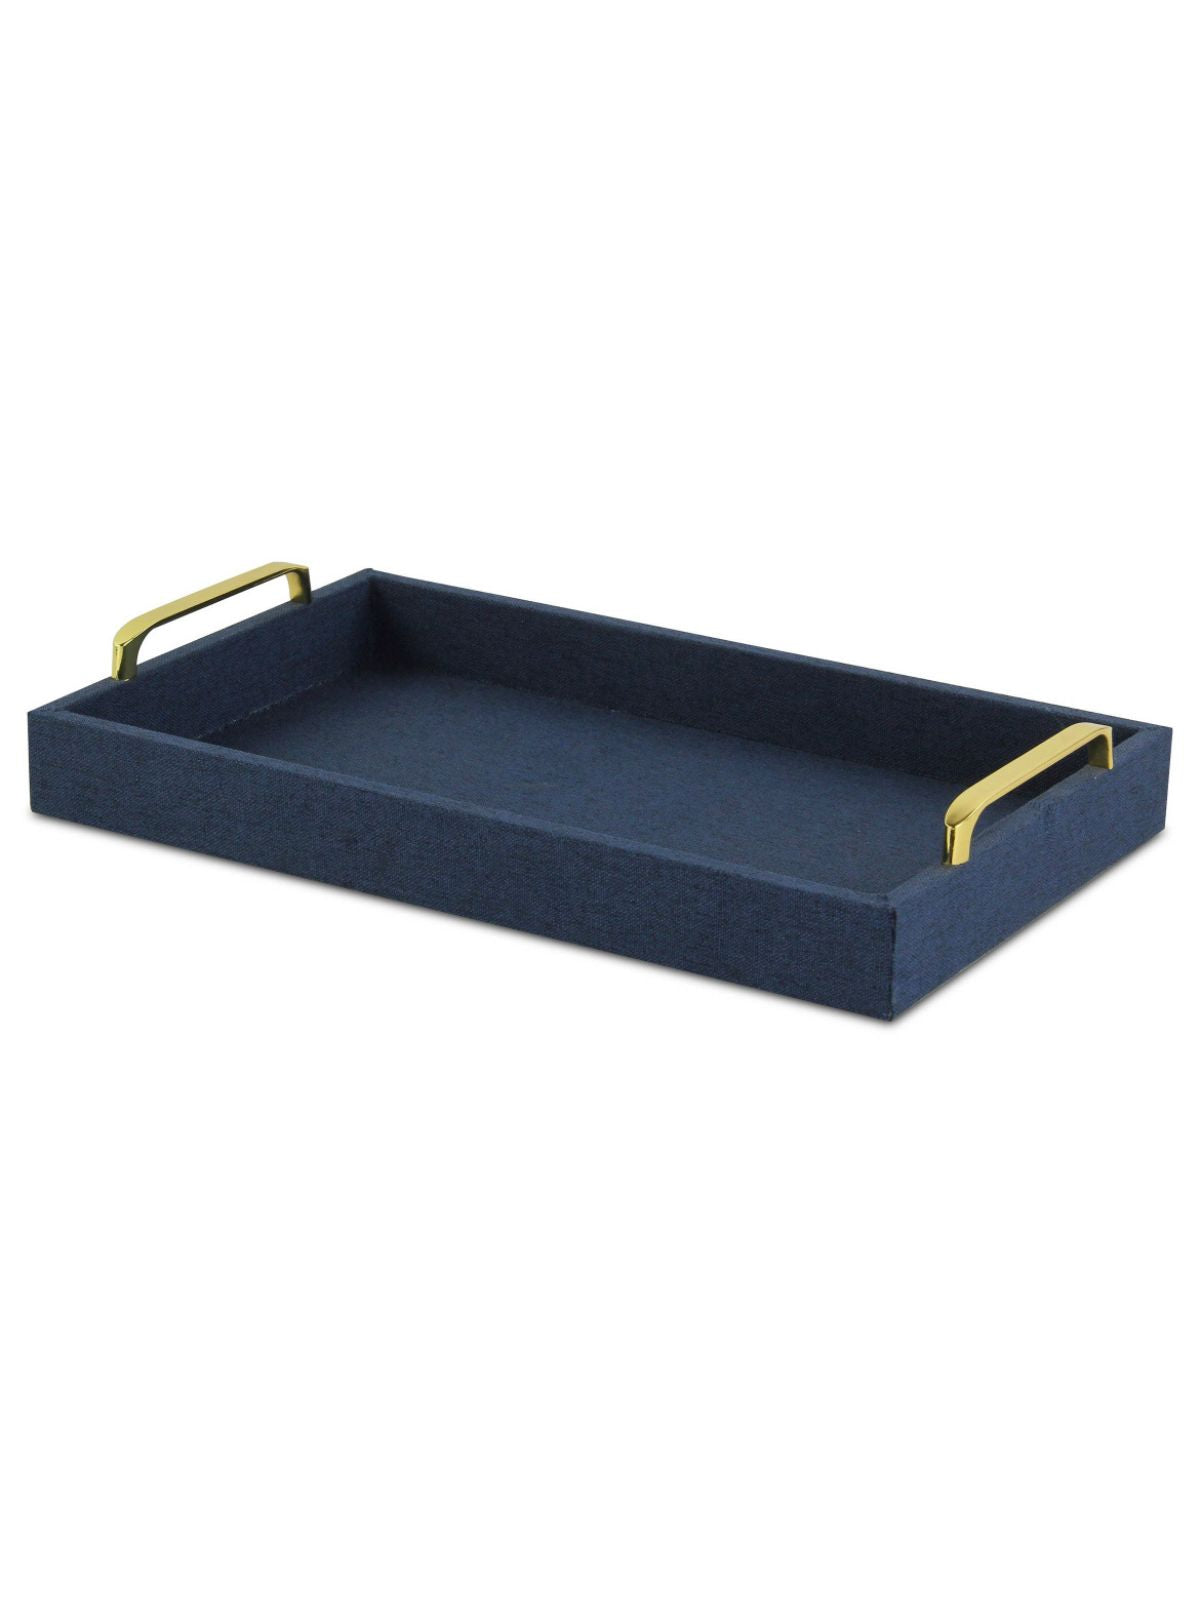 The Isola Di Canter Linen Tray in Navy Blue is an entirely handmade and hand crafted design that blends an engineered wood frame with a linen outer fabric and metal hardware.